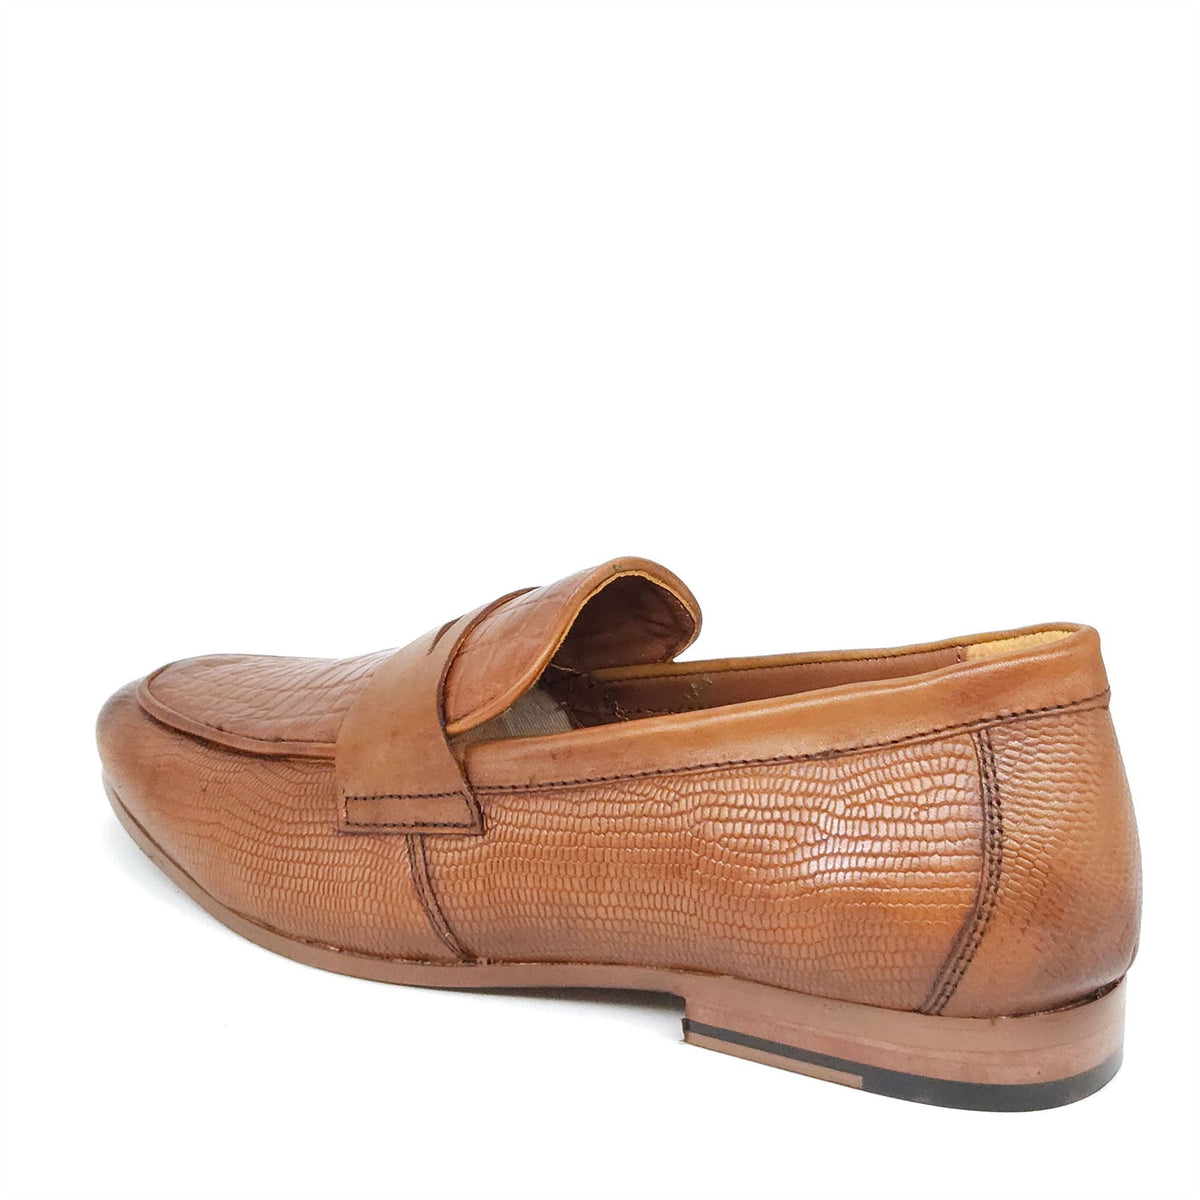 HX London Sutton Textured Penny Loafers